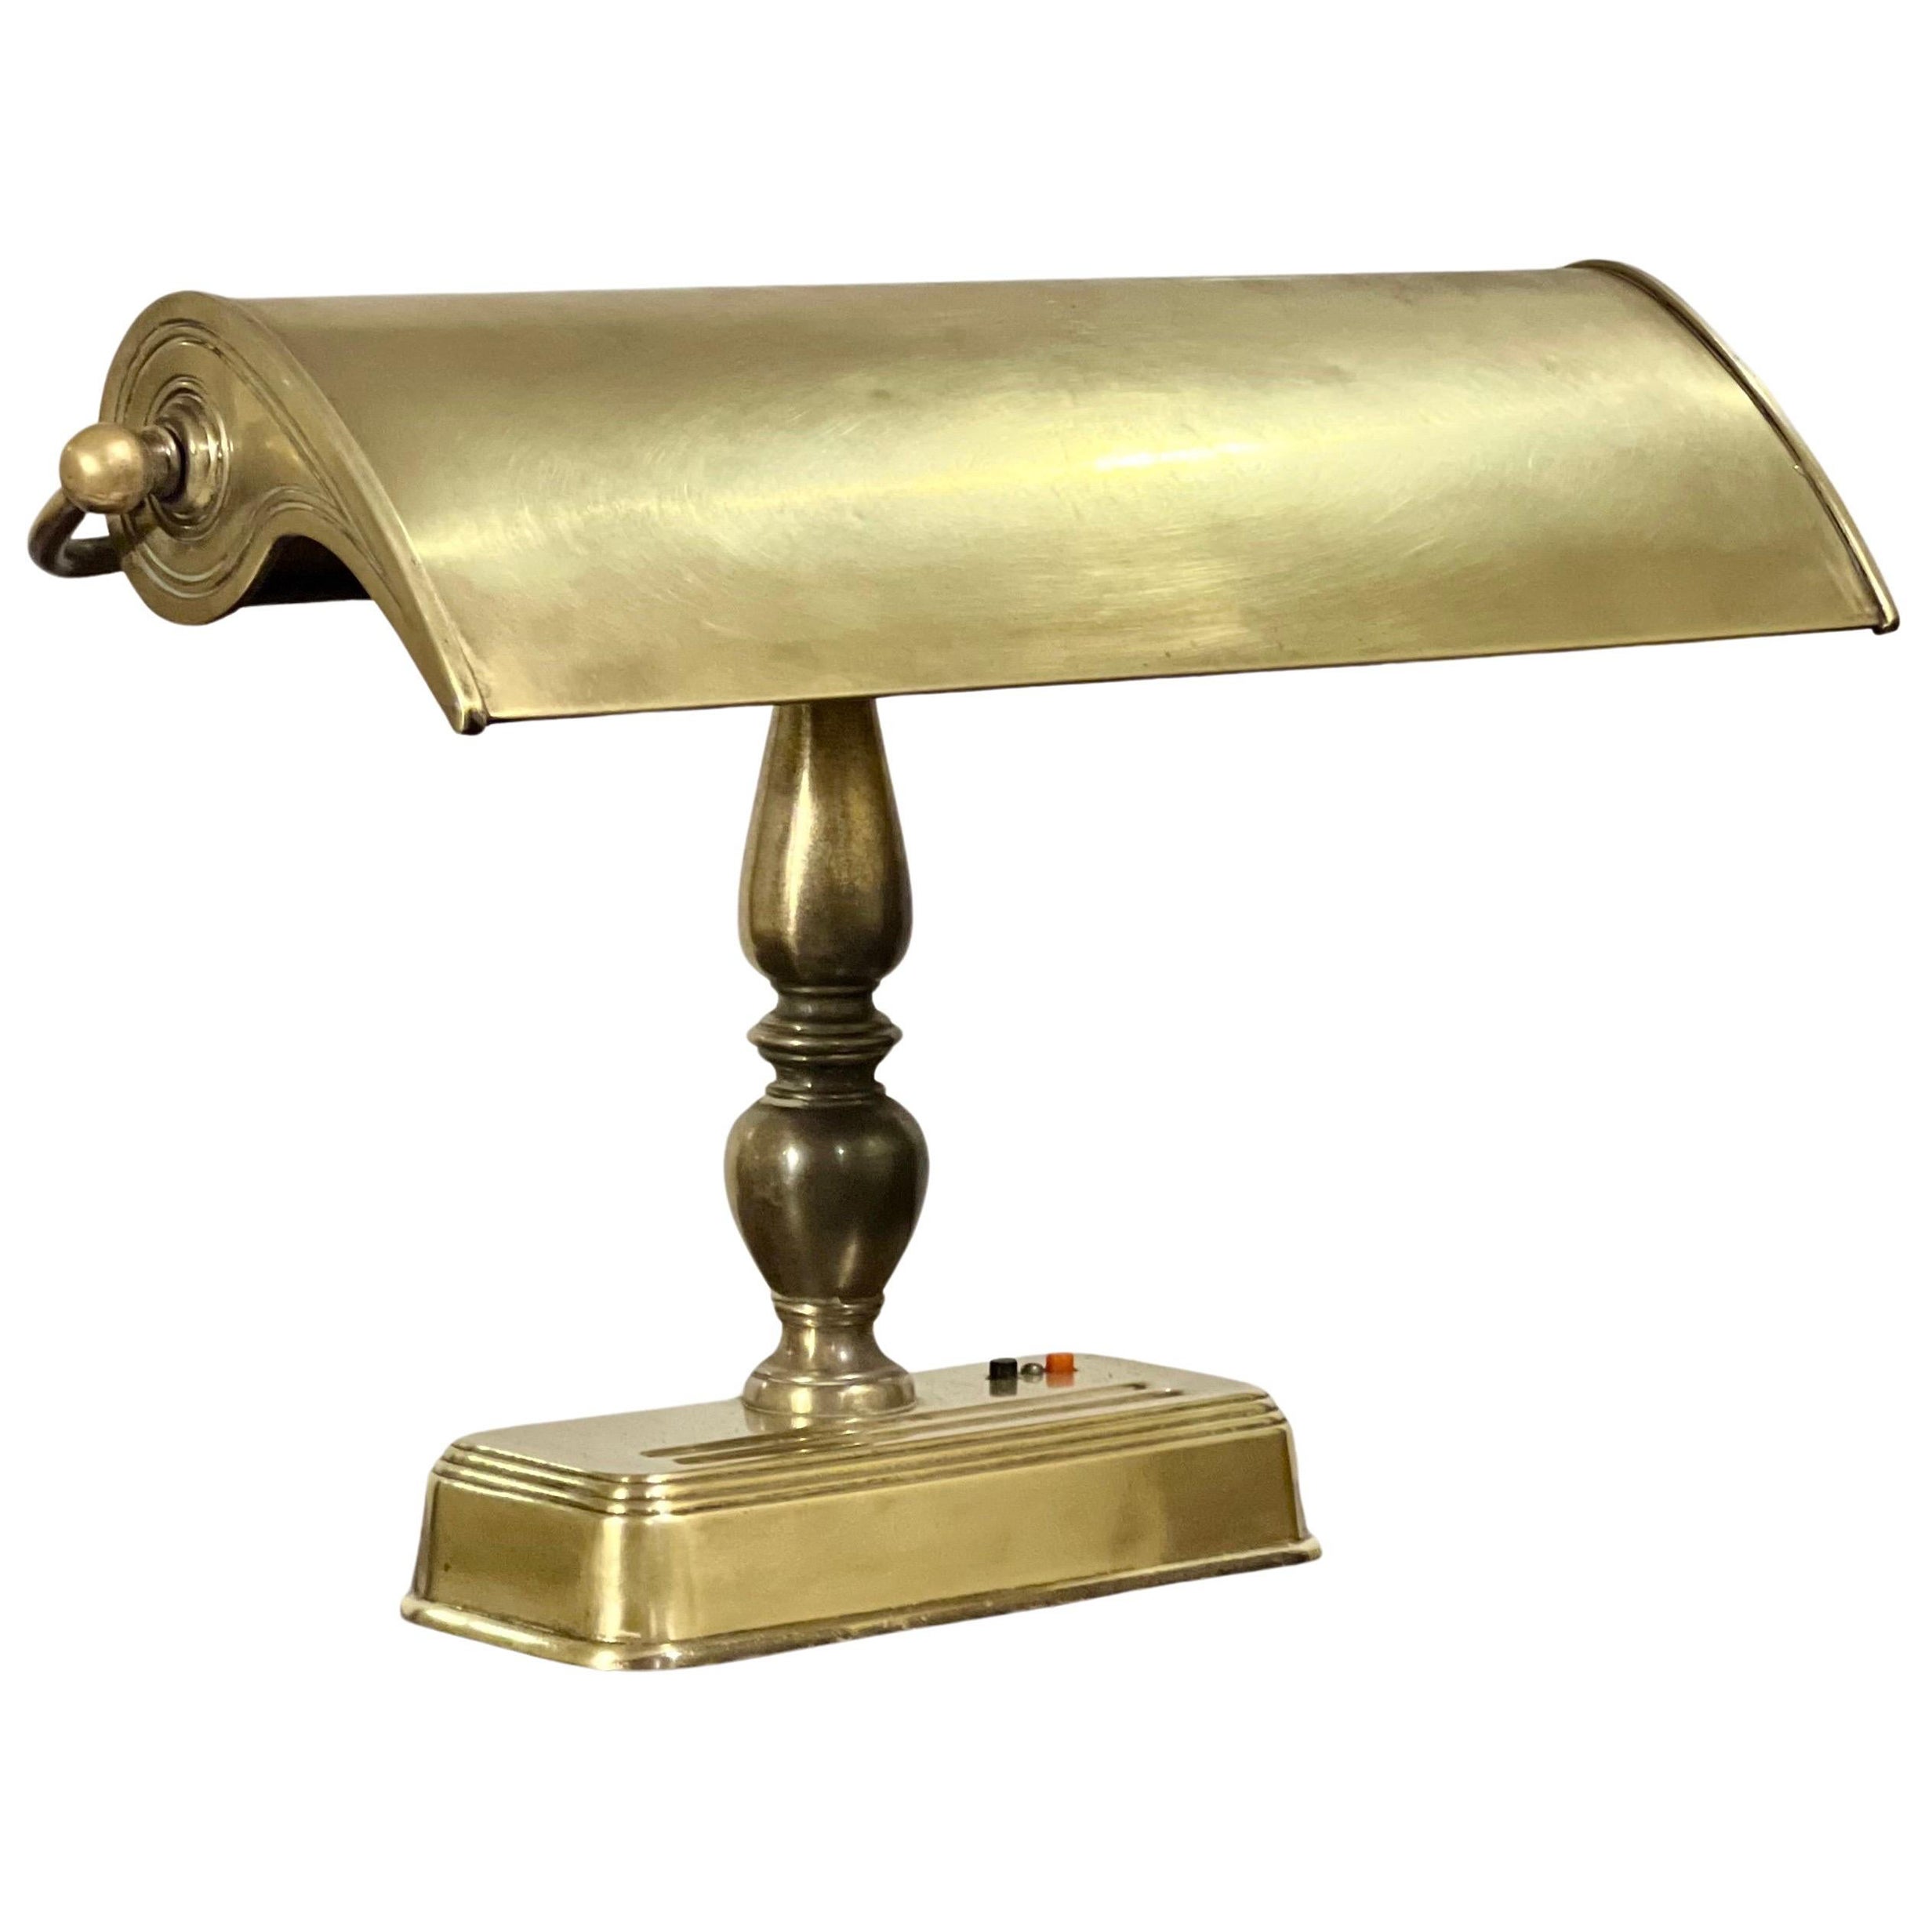 Mid 20th Century Large Brass Banker's Desk Lamp For Sale